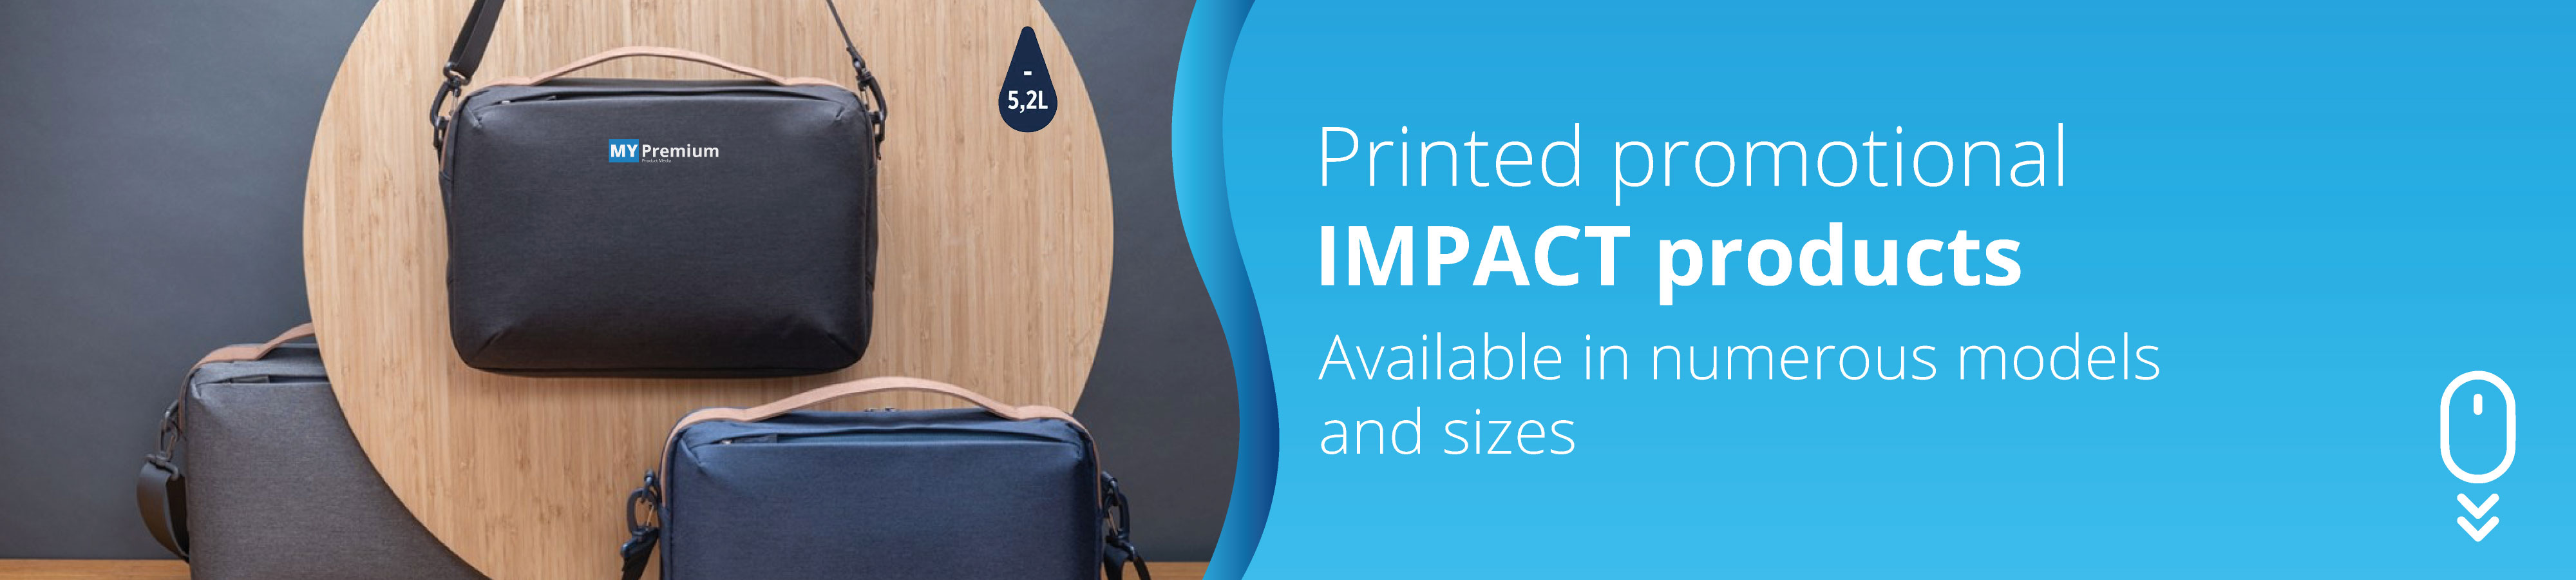 printed-promotional-impact-collection